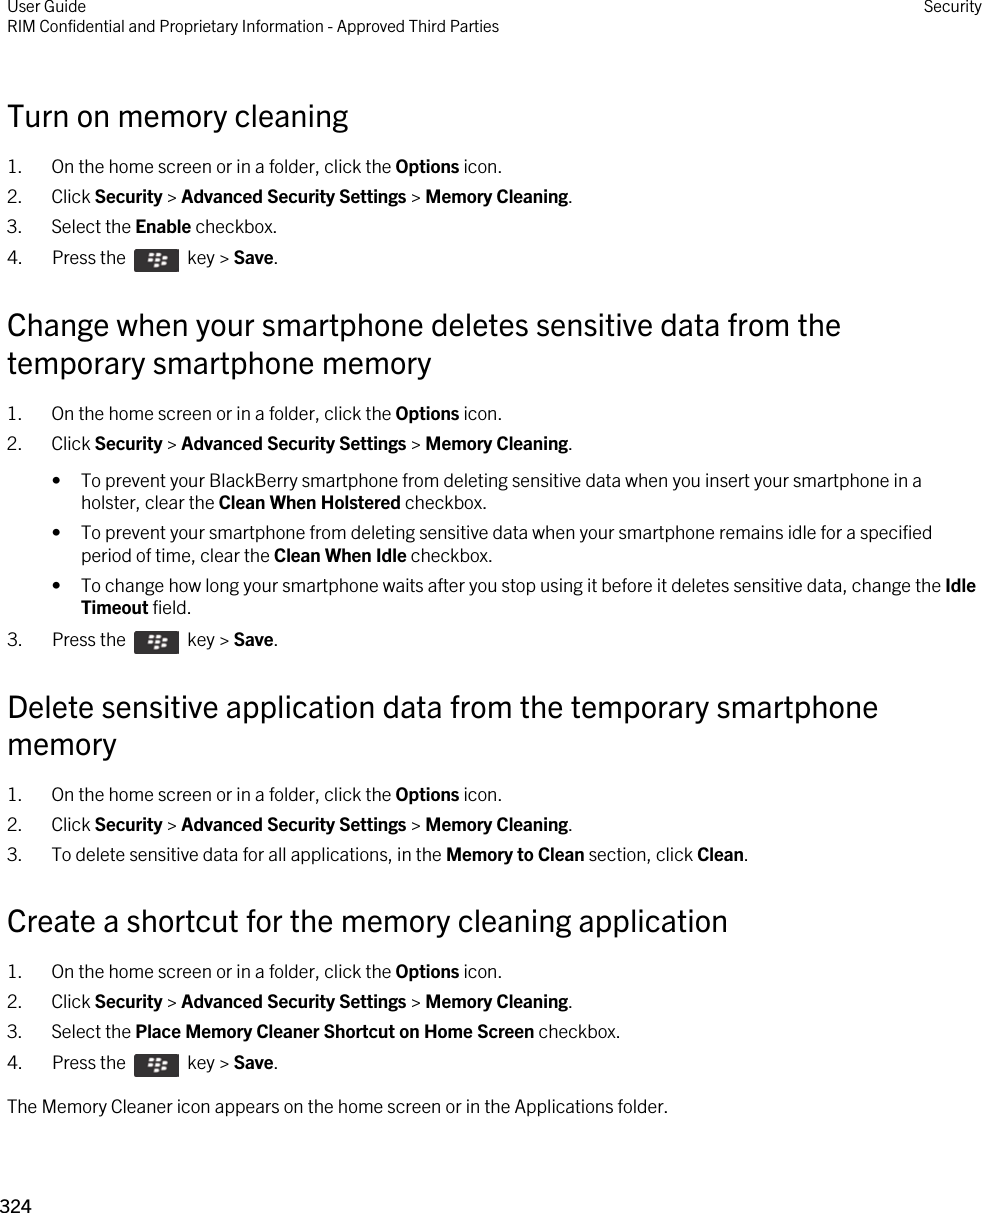 Turn on memory cleaning1. On the home screen or in a folder, click the Options icon.2. Click Security &gt; Advanced Security Settings &gt; Memory Cleaning.3. Select the Enable checkbox.4.  Press the    key &gt; Save. Change when your smartphone deletes sensitive data from the temporary smartphone memory1. On the home screen or in a folder, click the Options icon.2. Click Security &gt; Advanced Security Settings &gt; Memory Cleaning.• To prevent your BlackBerry smartphone from deleting sensitive data when you insert your smartphone in a holster, clear the Clean When Holstered checkbox.• To prevent your smartphone from deleting sensitive data when your smartphone remains idle for a specified period of time, clear the Clean When Idle checkbox.• To change how long your smartphone waits after you stop using it before it deletes sensitive data, change the Idle Timeout field.3.  Press the    key &gt; Save. Delete sensitive application data from the temporary smartphone memory1. On the home screen or in a folder, click the Options icon.2. Click Security &gt; Advanced Security Settings &gt; Memory Cleaning.3. To delete sensitive data for all applications, in the Memory to Clean section, click Clean.Create a shortcut for the memory cleaning application1. On the home screen or in a folder, click the Options icon.2. Click Security &gt; Advanced Security Settings &gt; Memory Cleaning.3. Select the Place Memory Cleaner Shortcut on Home Screen checkbox.4.  Press the    key &gt; Save. The Memory Cleaner icon appears on the home screen or in the Applications folder.User GuideRIM Confidential and Proprietary Information - Approved Third Parties Security324 